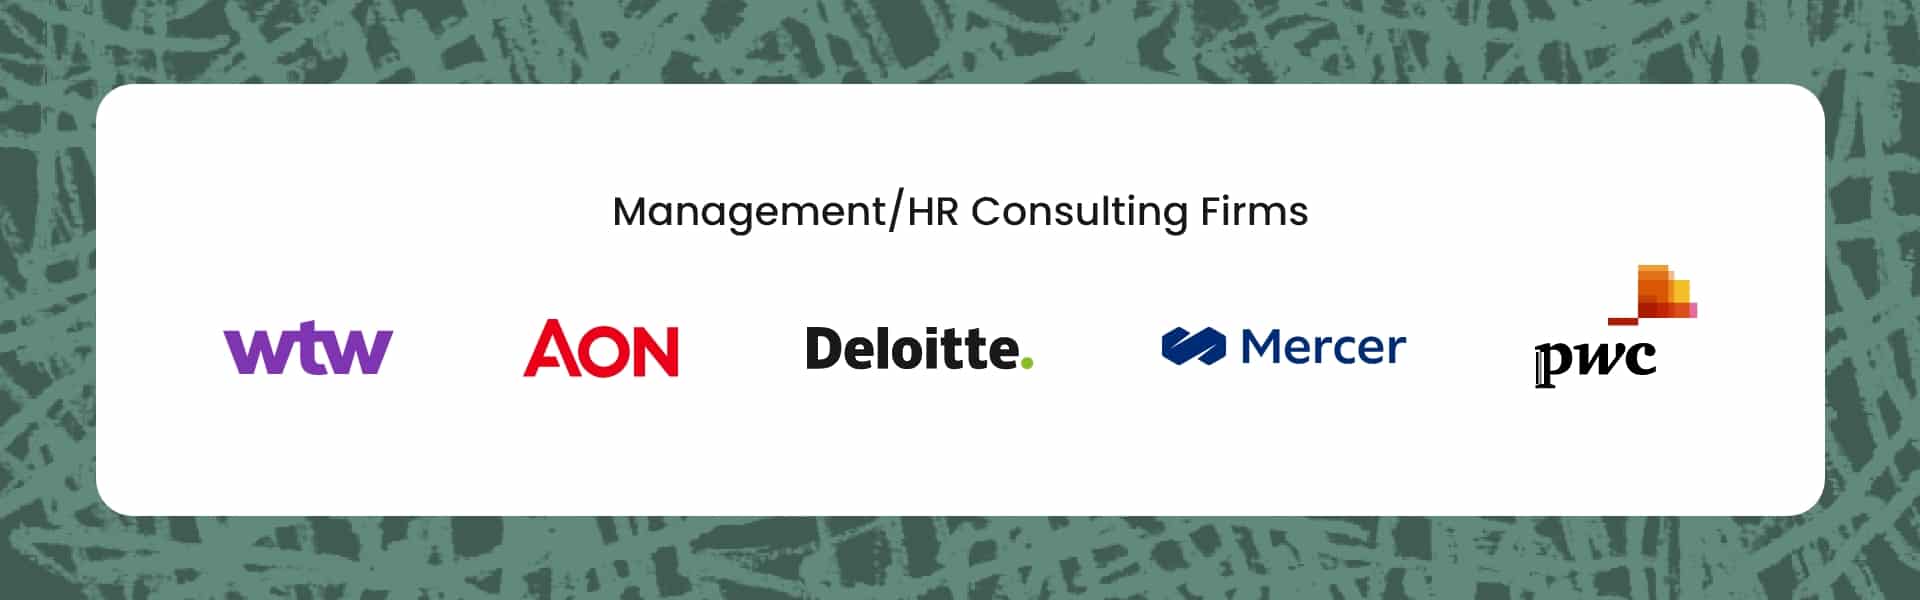 Management/HR Consulting Firms platforms vendor type; employee experience tools and providers